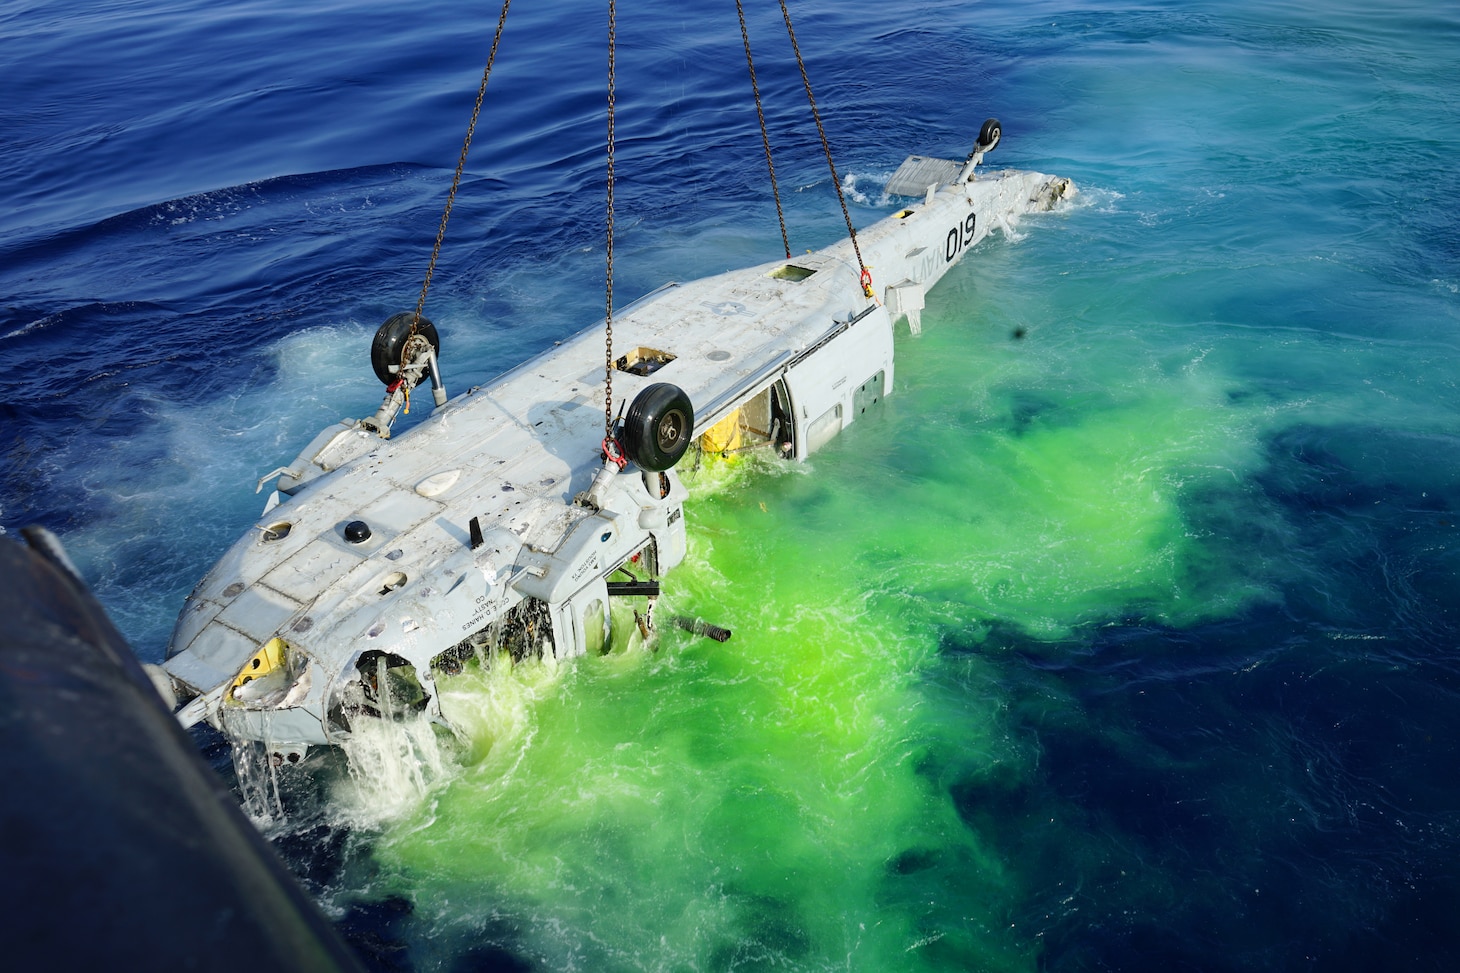 An MH-60S is recovered from 19,075 feet below the ocean surface during a NAVSAFECEN and SUPSALV joint operation.